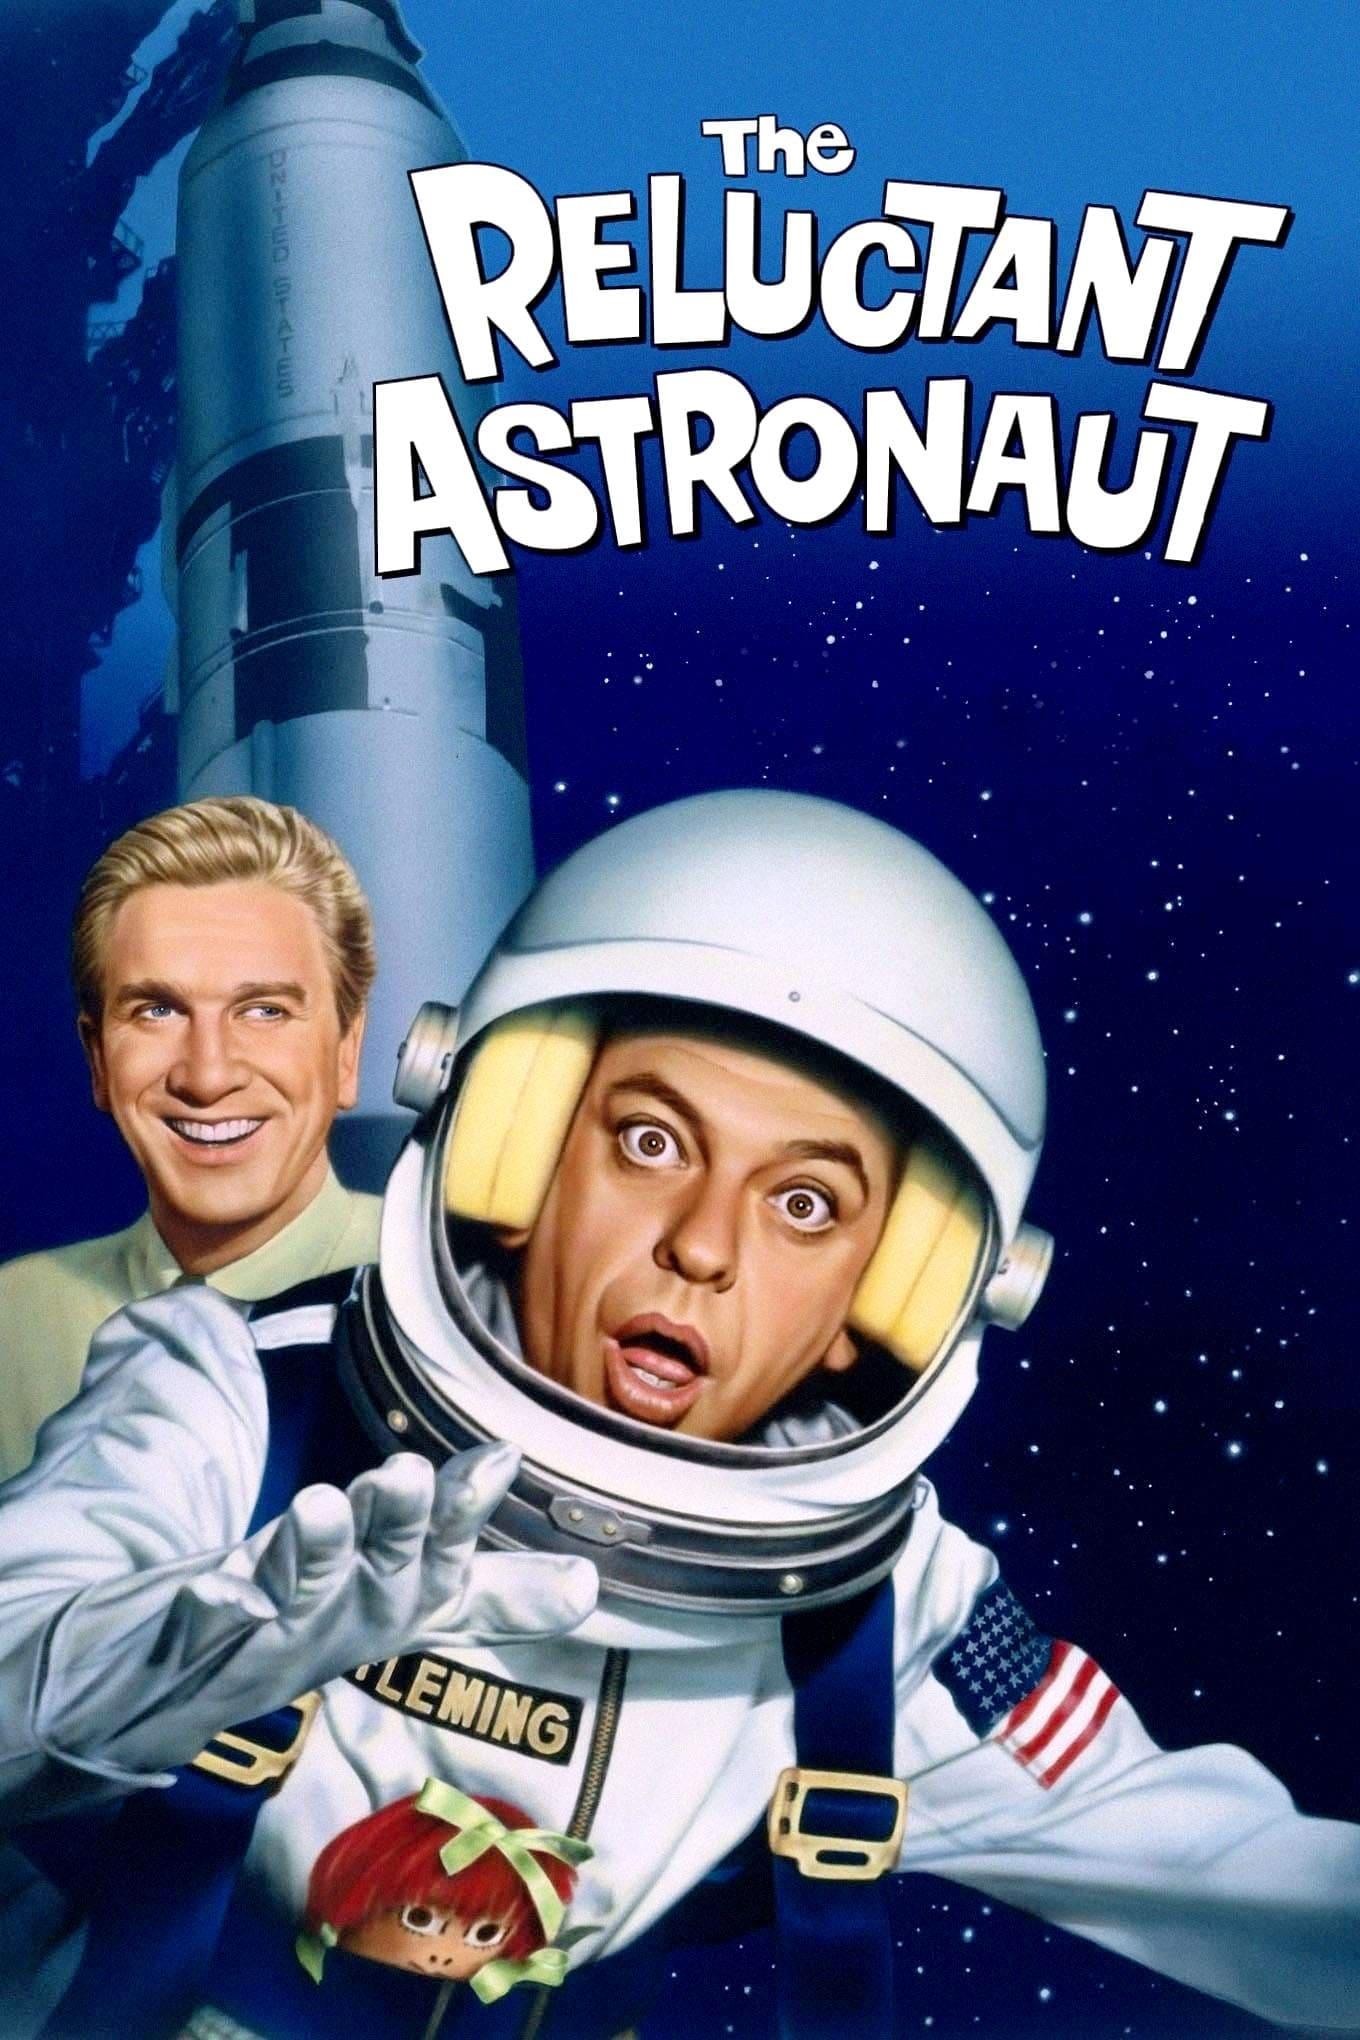 The Reluctant Astronaut poster